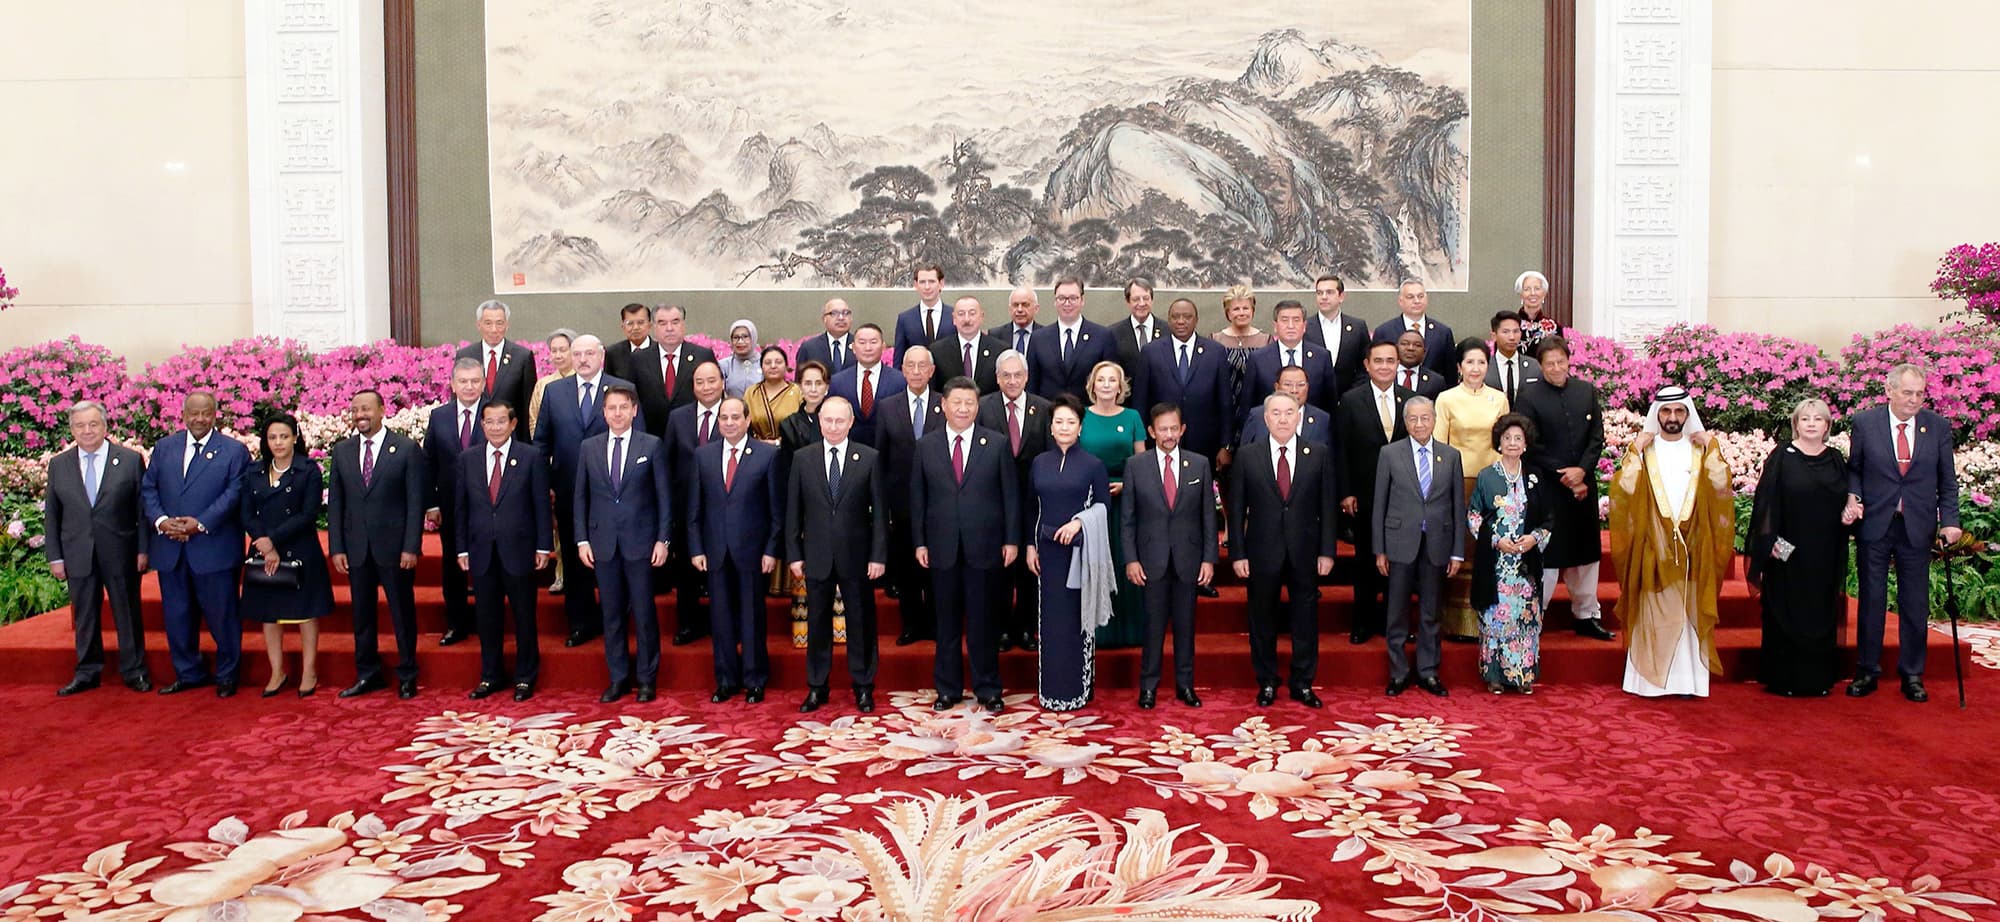 Chinese President Xi Jinping (C), his wife Peng Liyuan (next to Xi) and other leaders pose for a group photo session at a welcoming banquet for the Belt and Road Forum at the Great Hall of the People in Beijing on April 26, 2019. (Photo by JASON LEE / POOL / AFP)